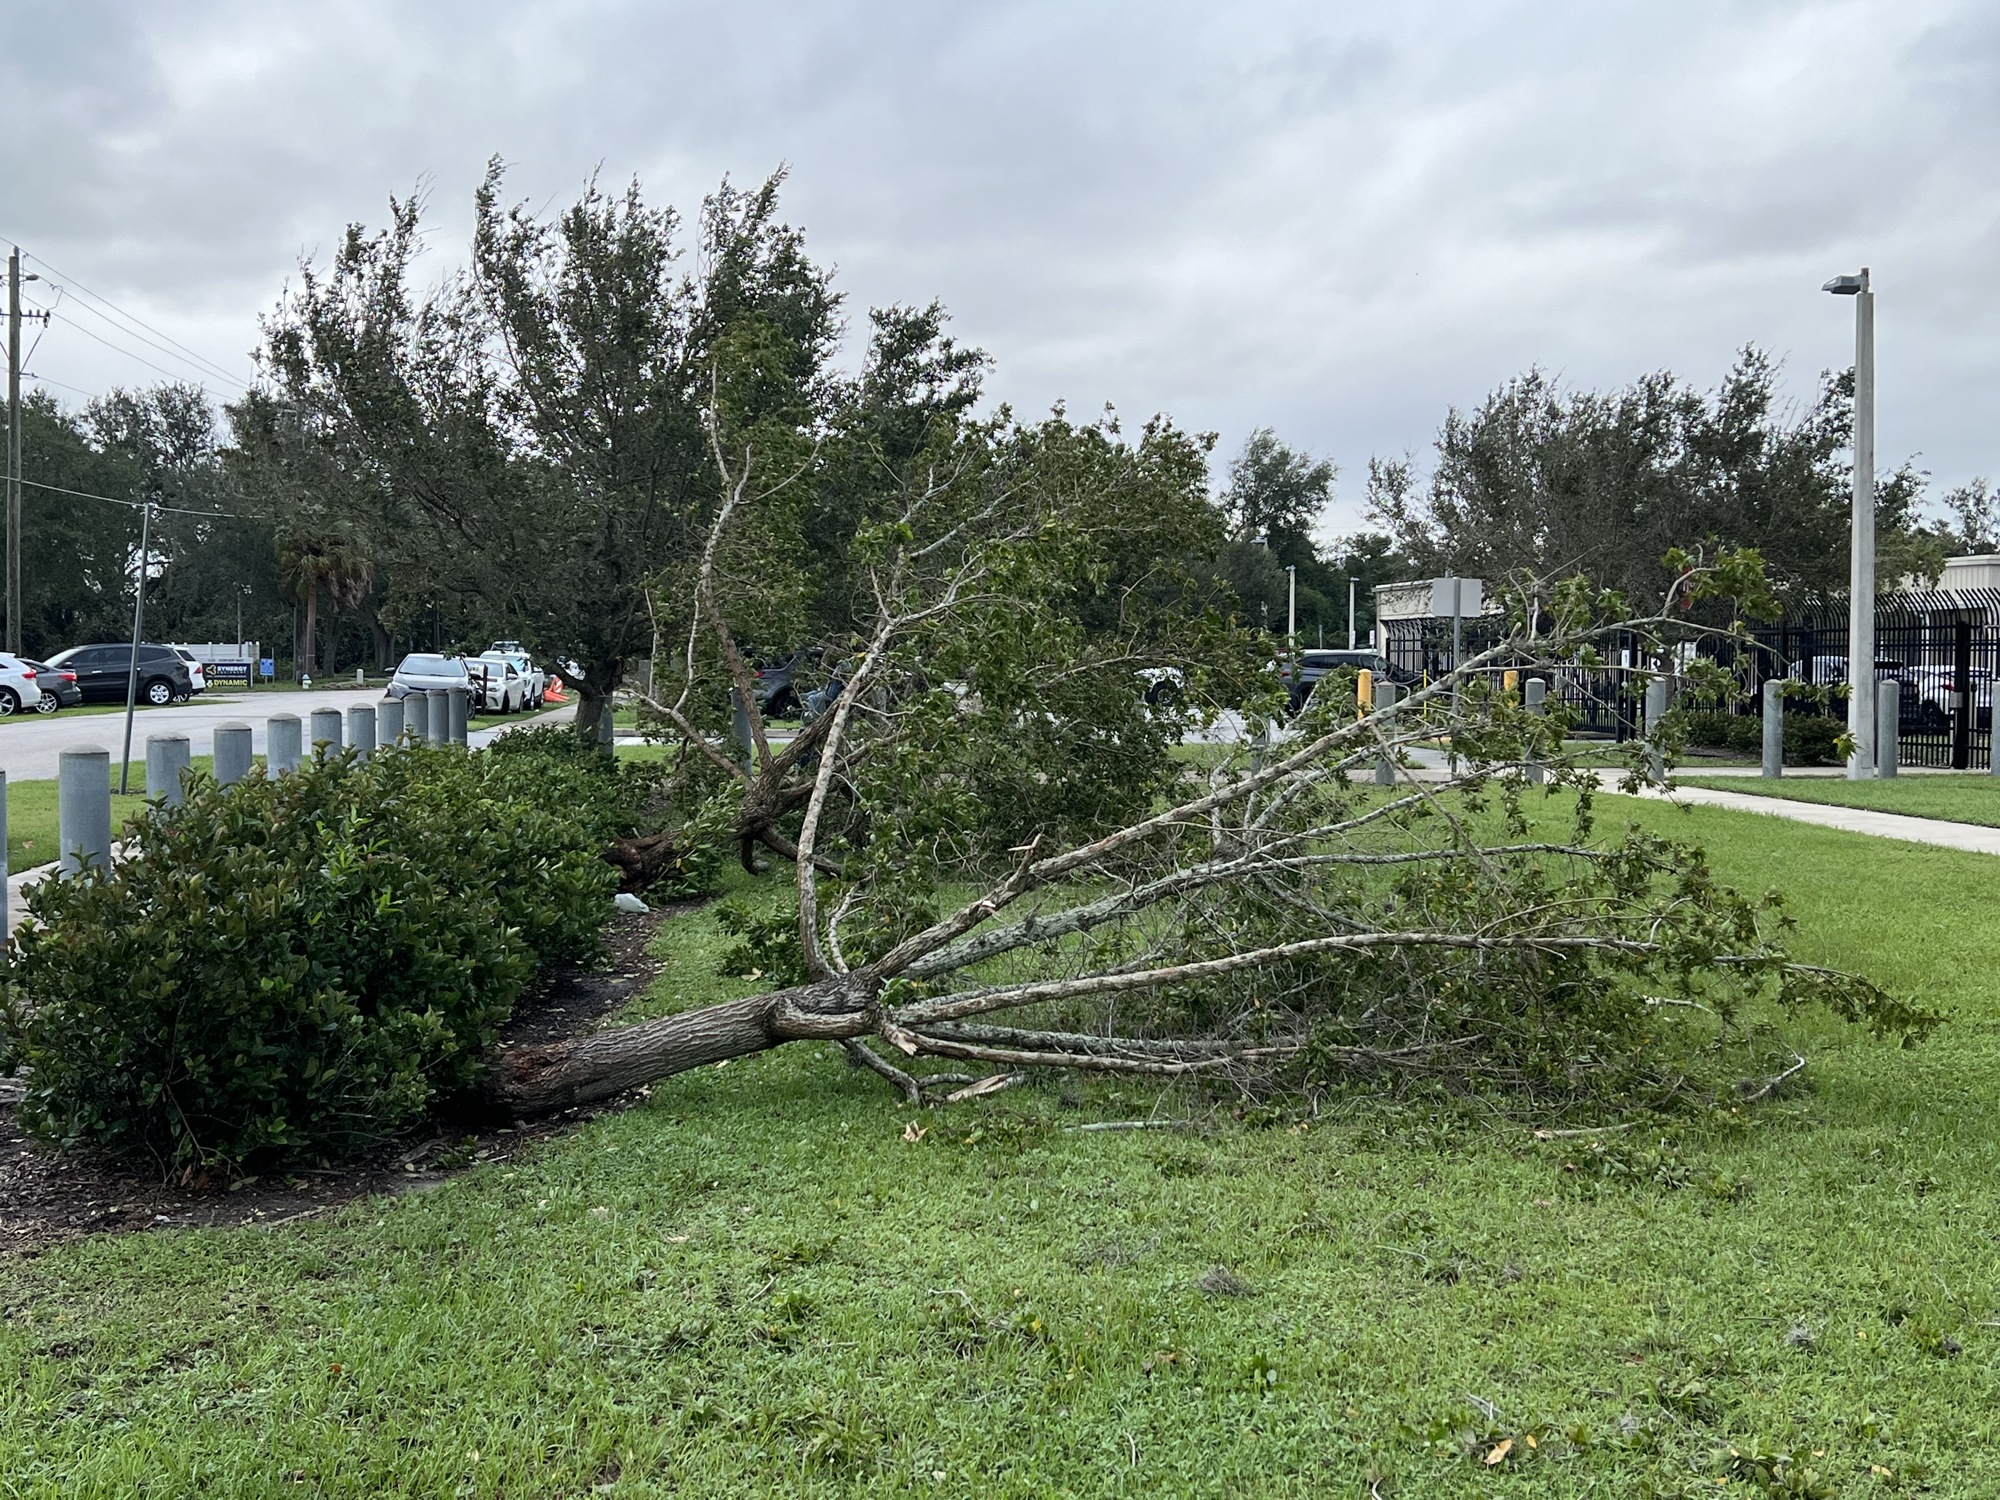 Fallen trees were seen near the Sarasota County Emergency Operations Center on Thursday morning. (Photo by Kaelyn Adix)